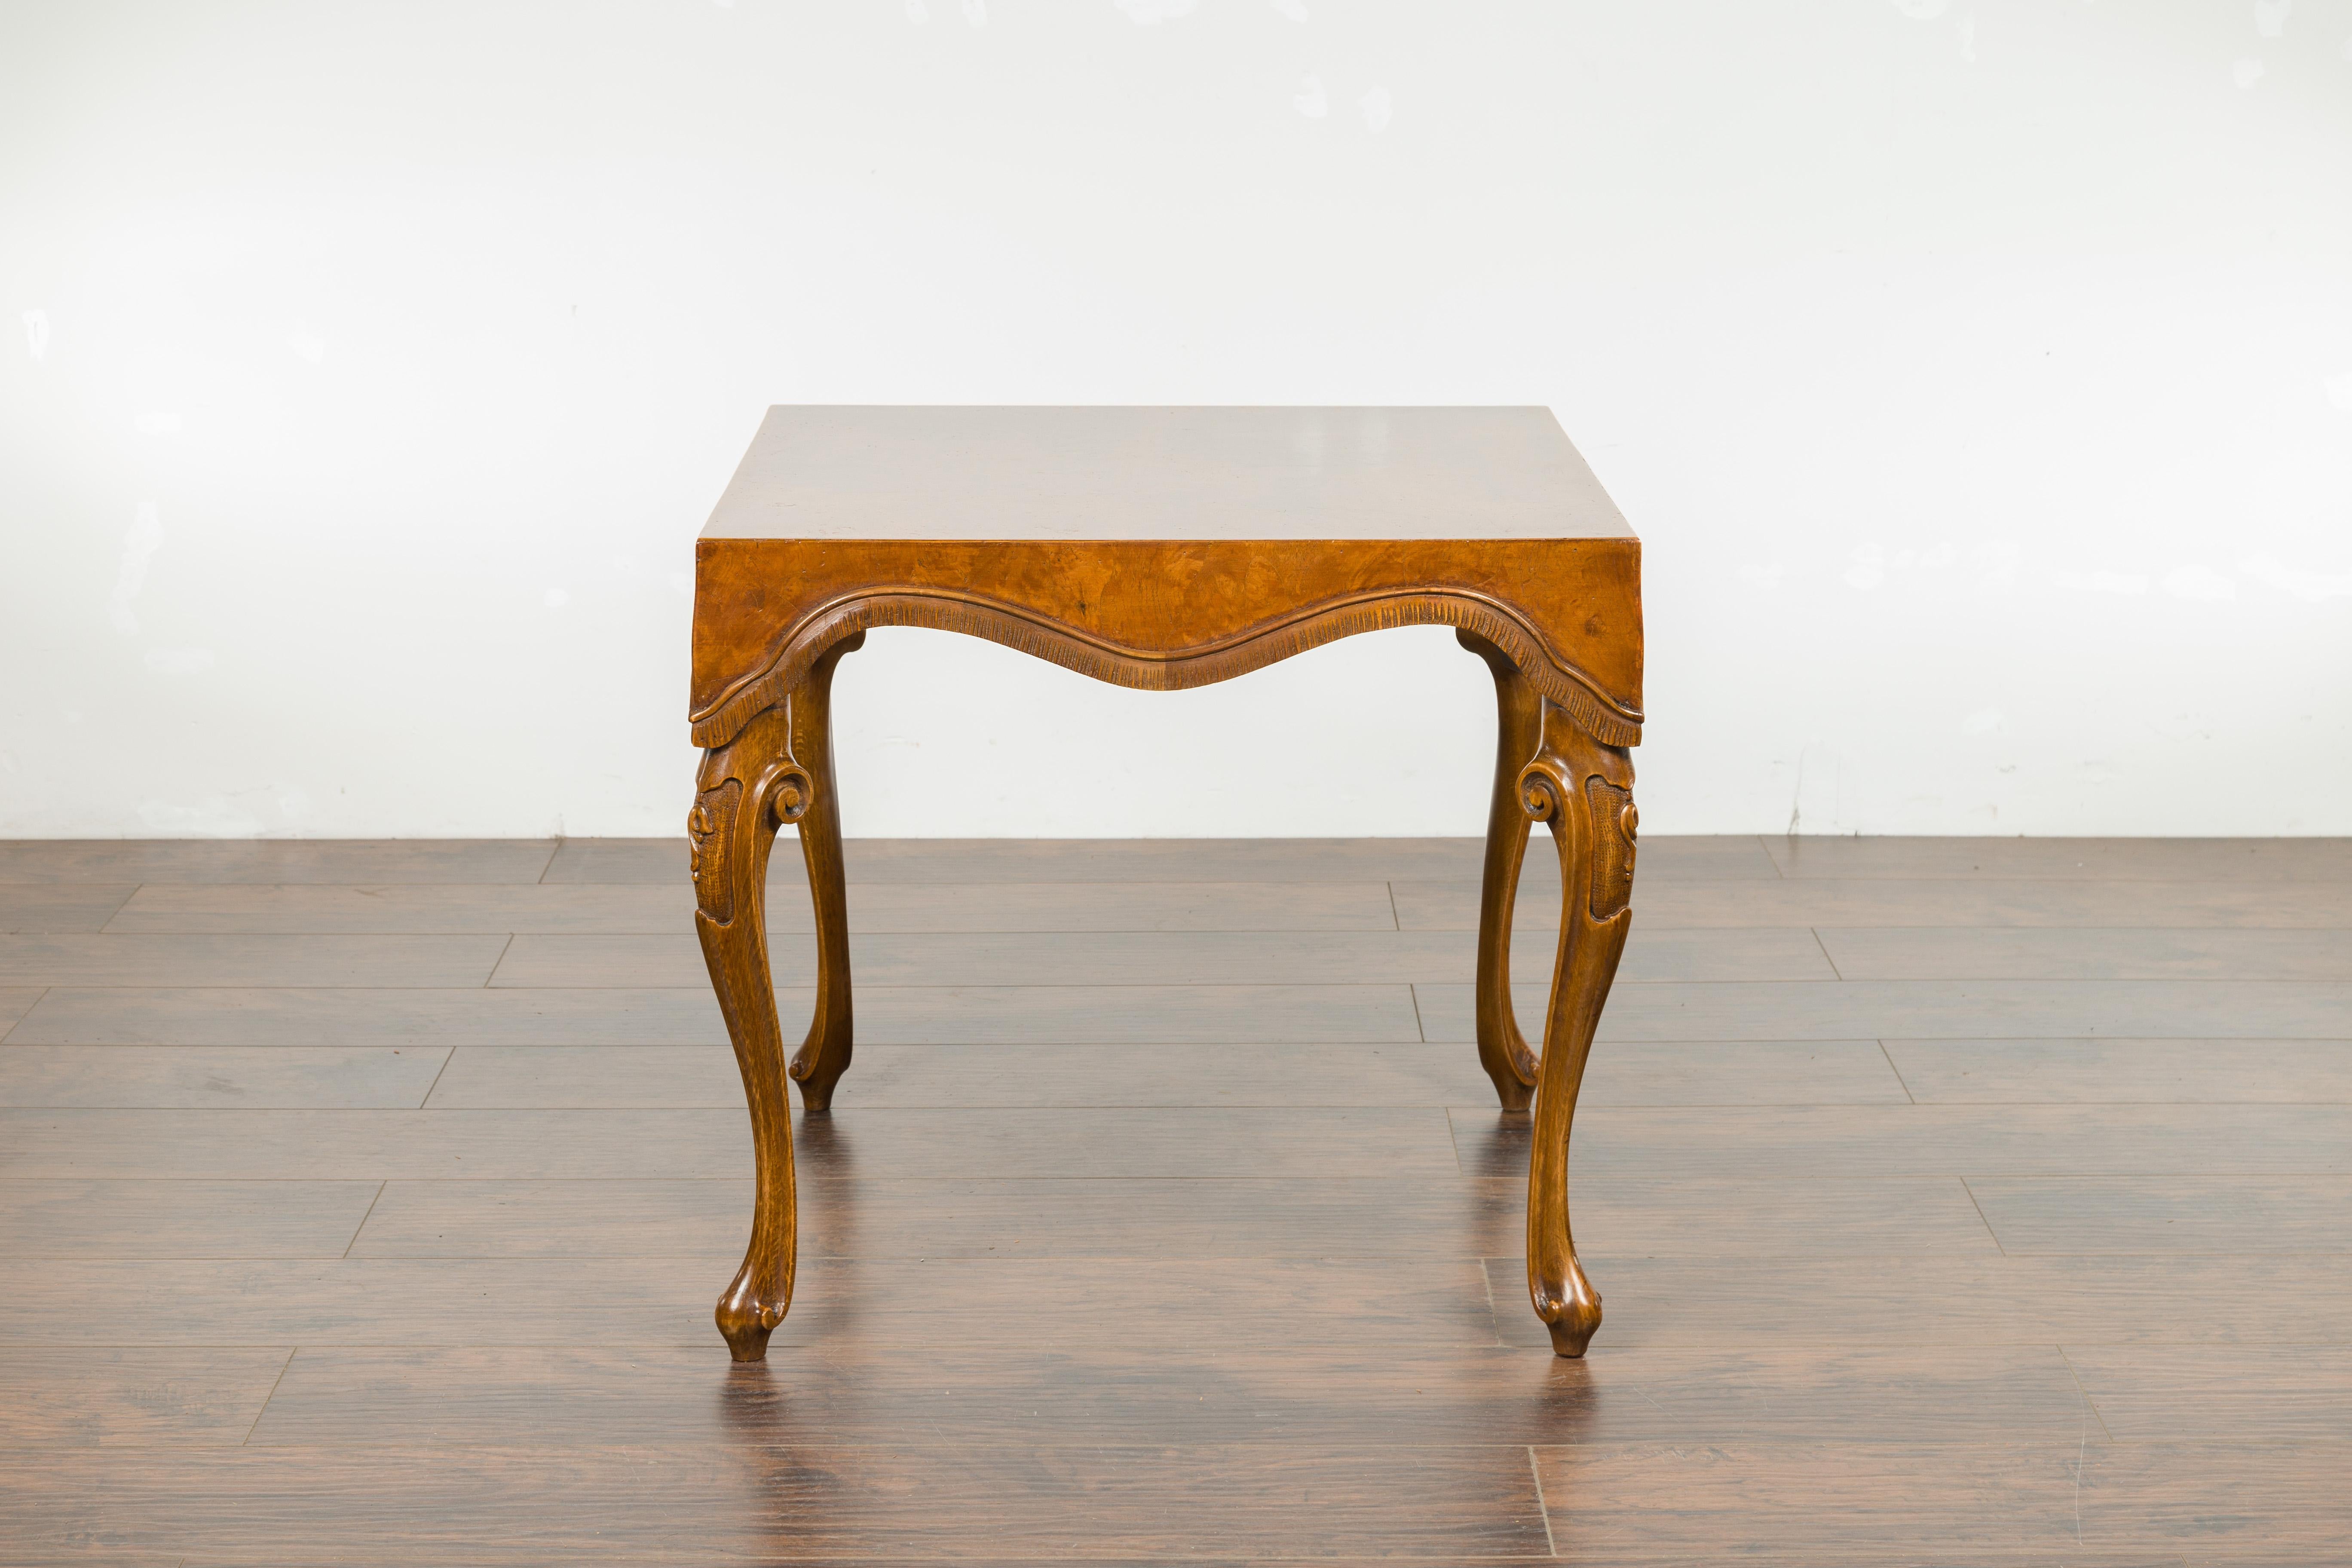 An Italian Rococo style walnut and olive wood square top side table from the mid-20th century, with cabriole legs. Created in Italy during the midcentury period, this walnut and olive wood side table charms us with its square top adorned with a